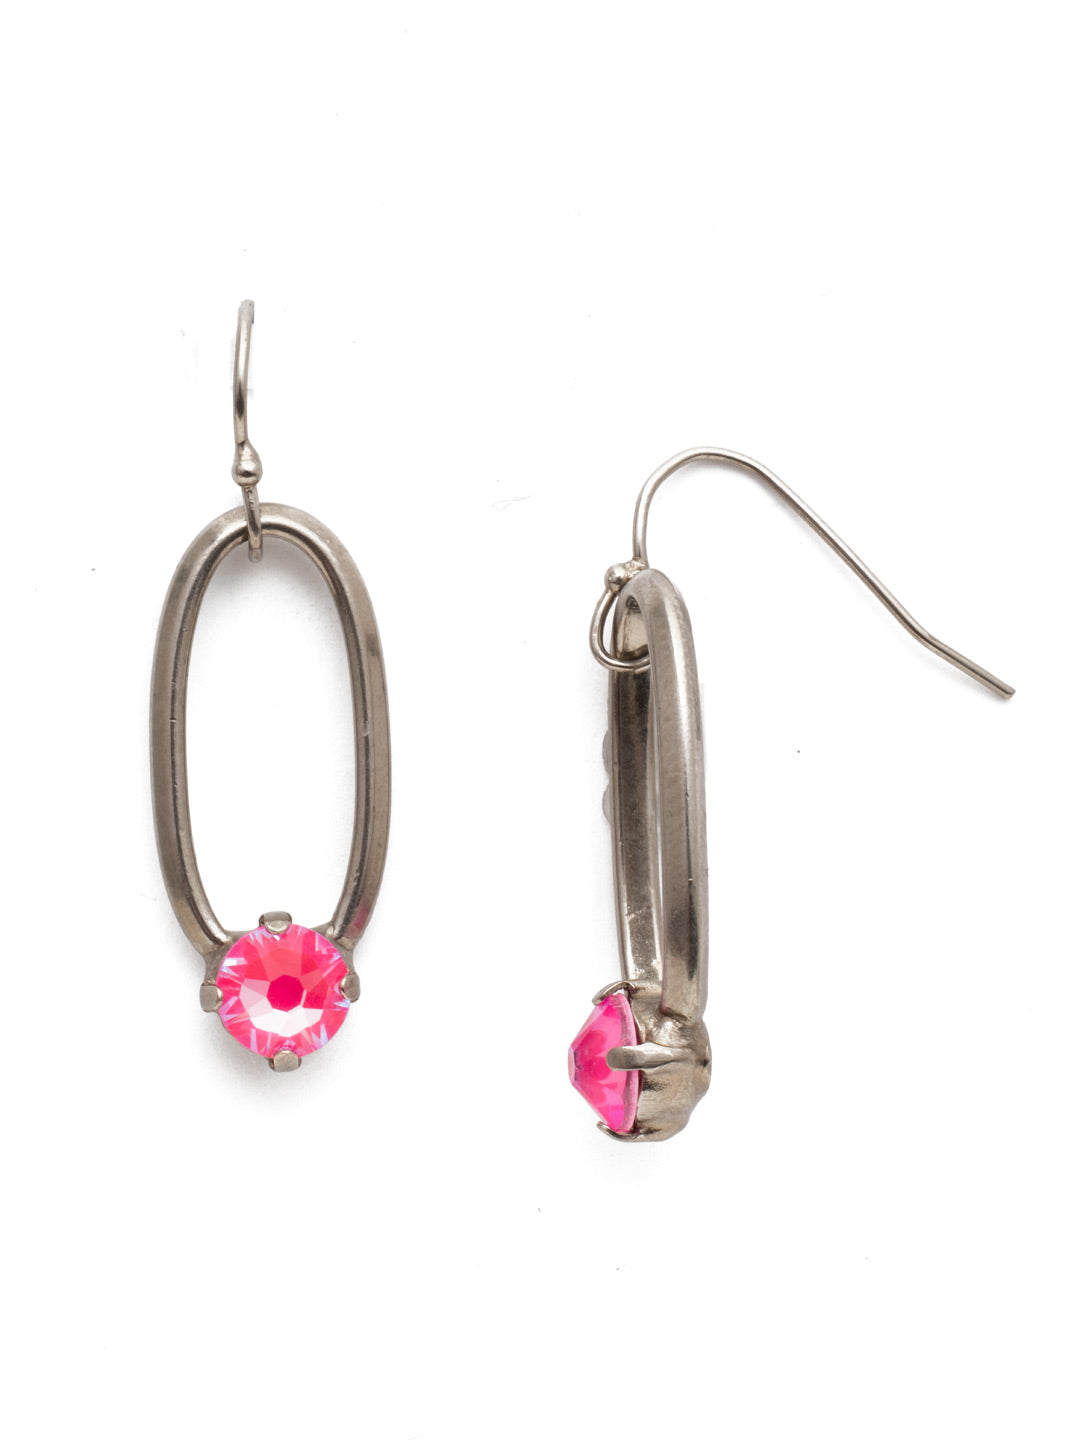 Paige Dangle Earrings - EET3ASETP - Metallic hoops or sparkling cyrstal studs? You can combine both when you choose our Paige Dangle Earrings. From Sorrelli's Electric Pink collection in our Antique Silver-tone finish.